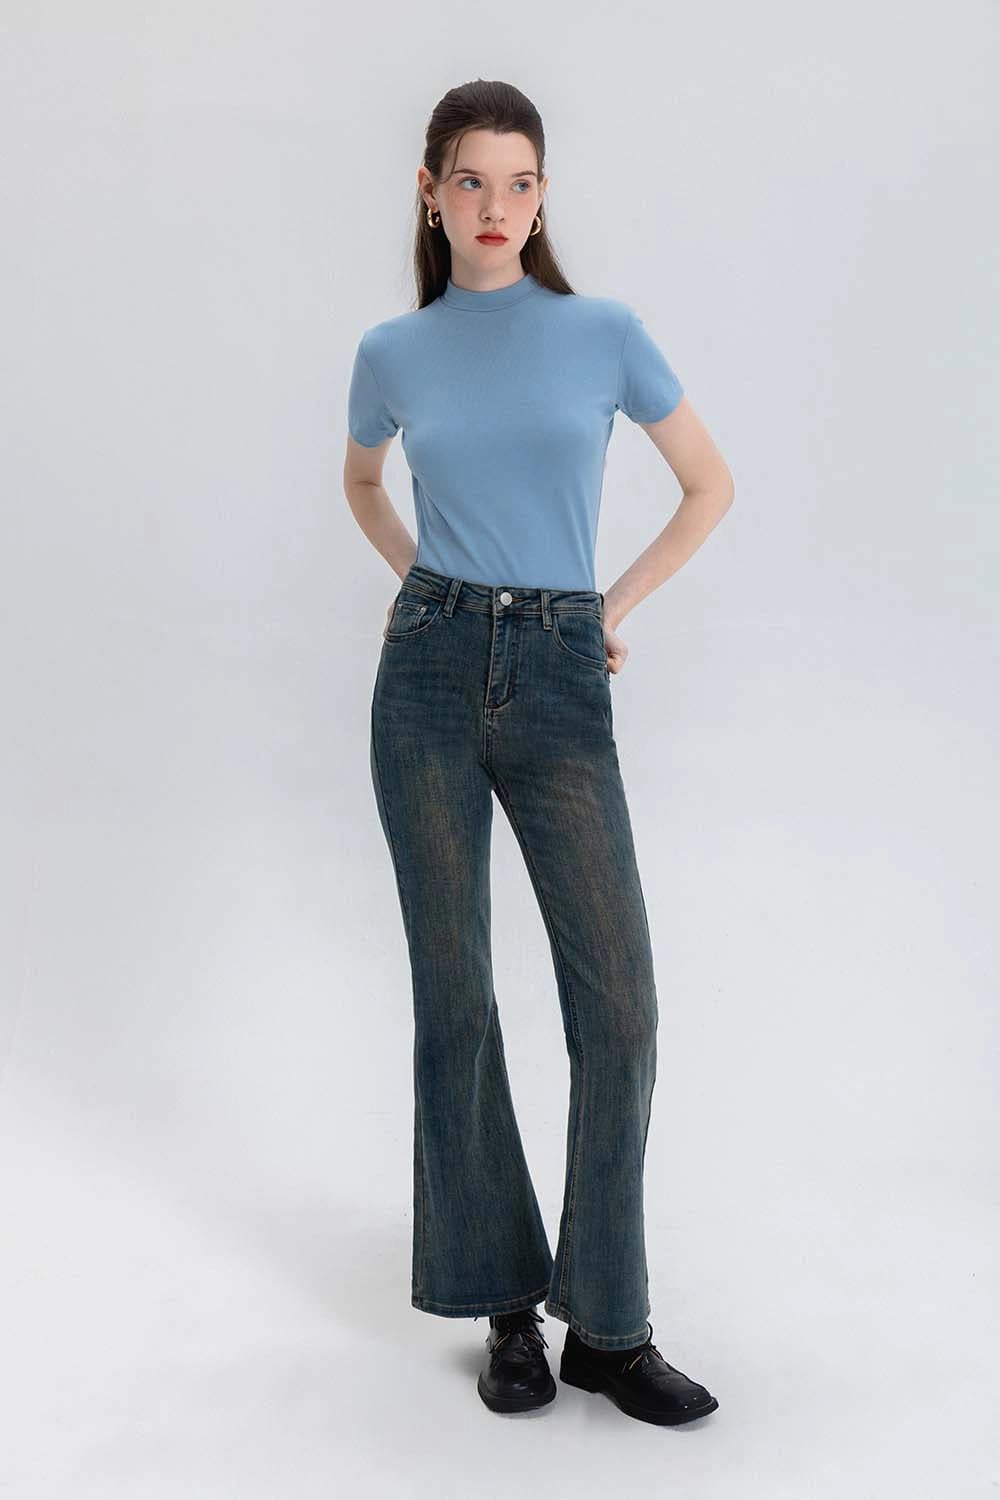 Chic Vintage Flared Jeans